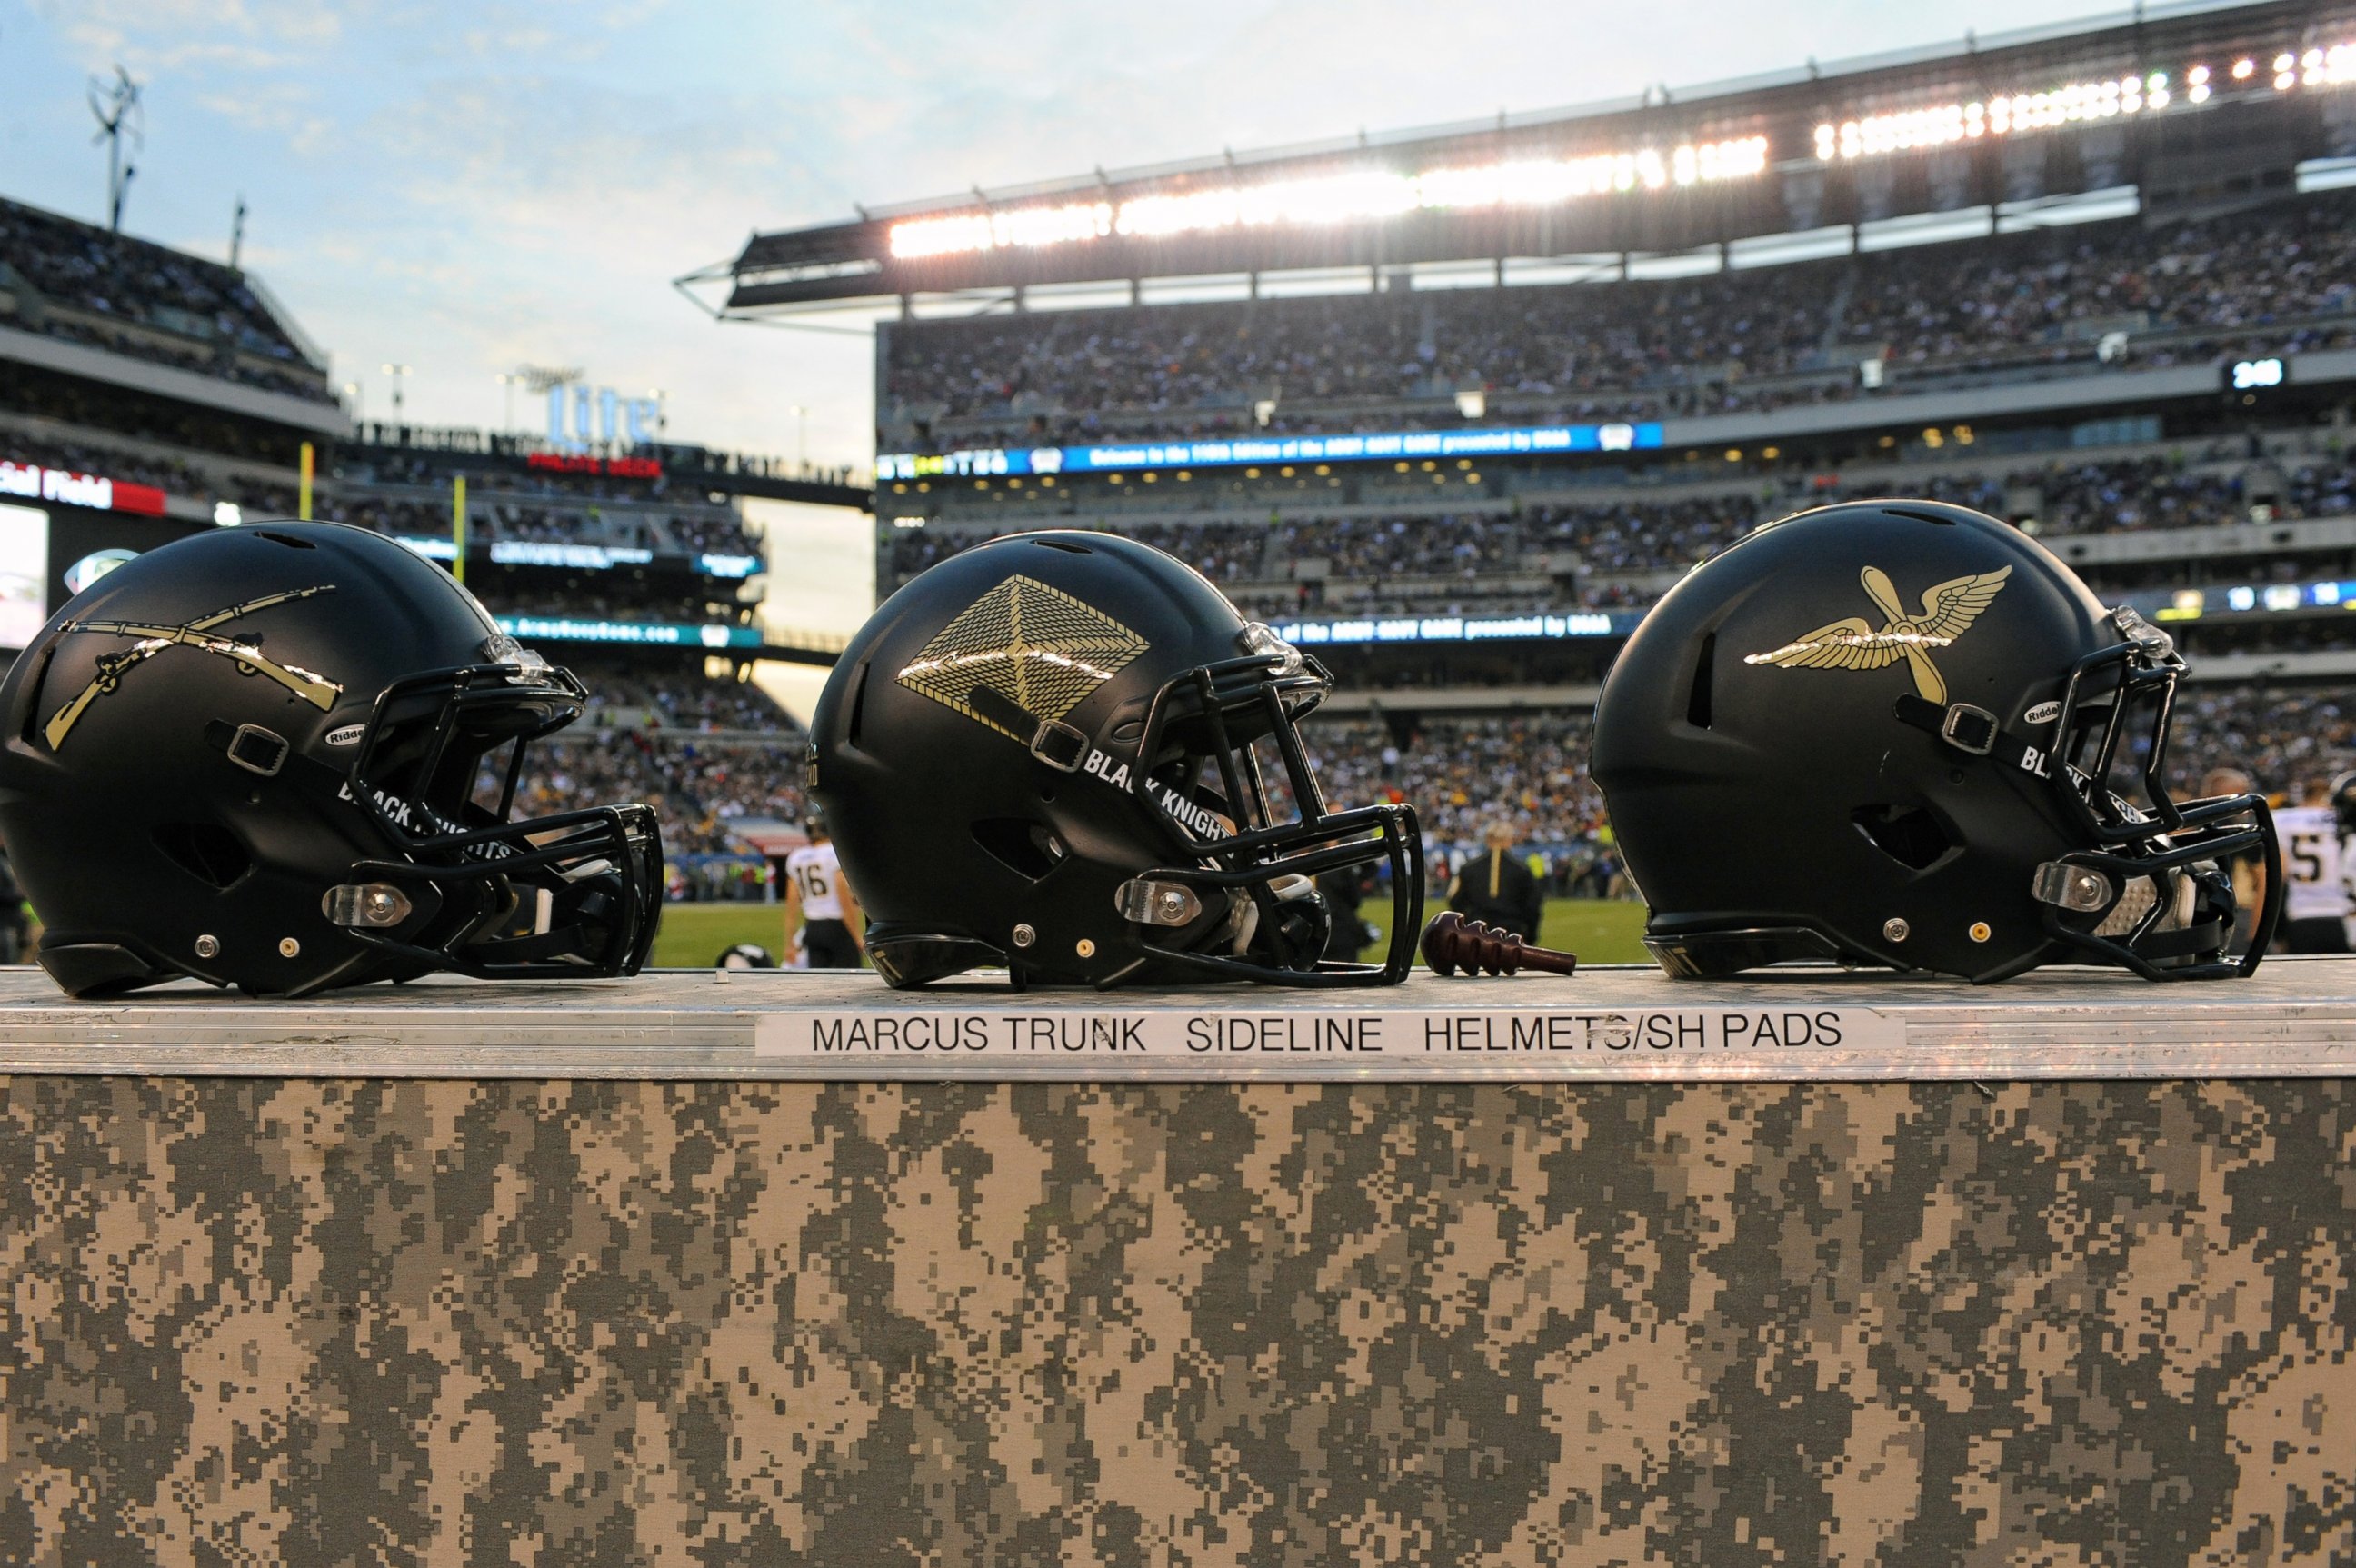 PHOTO: The Army Black Knights helmets are seen at Lincoln Financial Field in Philadelphia, Dec. 12, 2015.